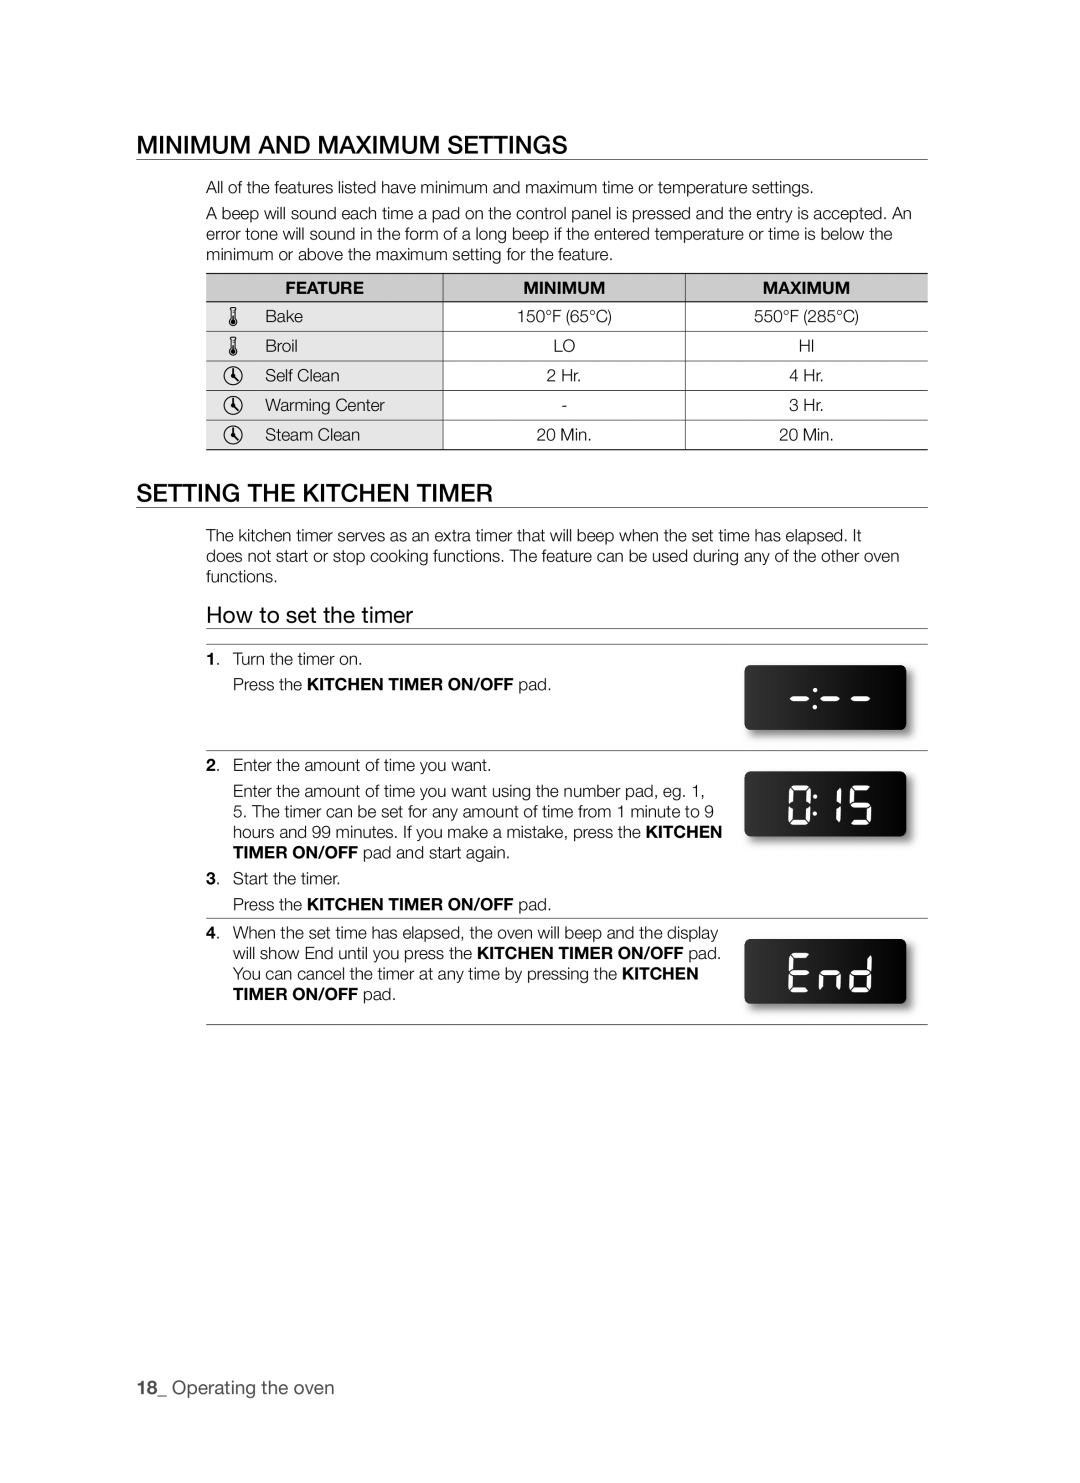 Samsung FCQ321HTUW Minimum And Maximum Settings, Setting The Kitchen Timer, How to set the timer, 1 Operating the oven 